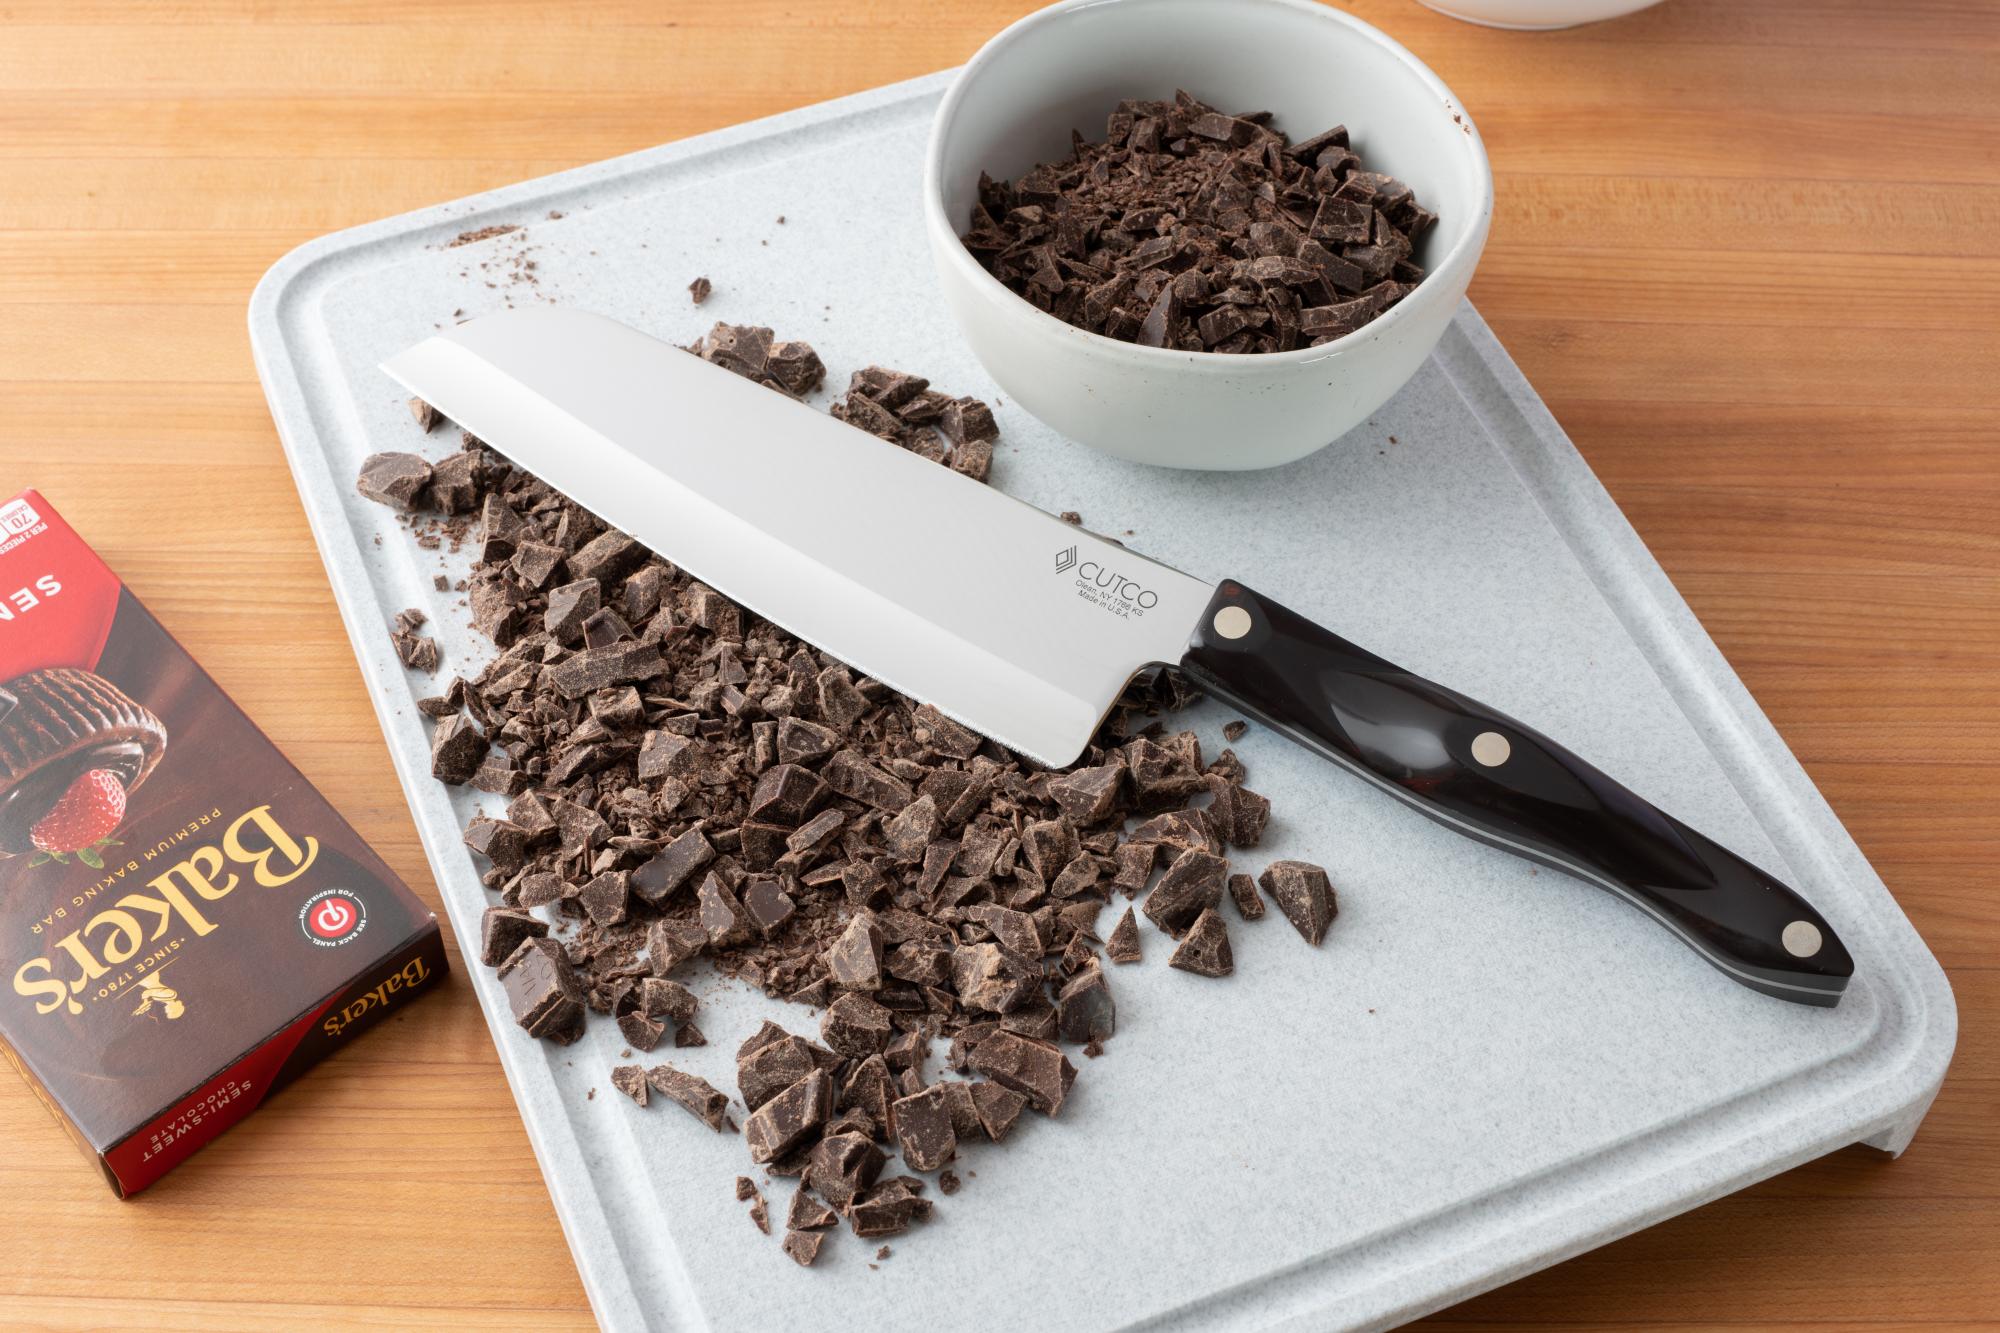 Chopping the cacao with a Santoku.